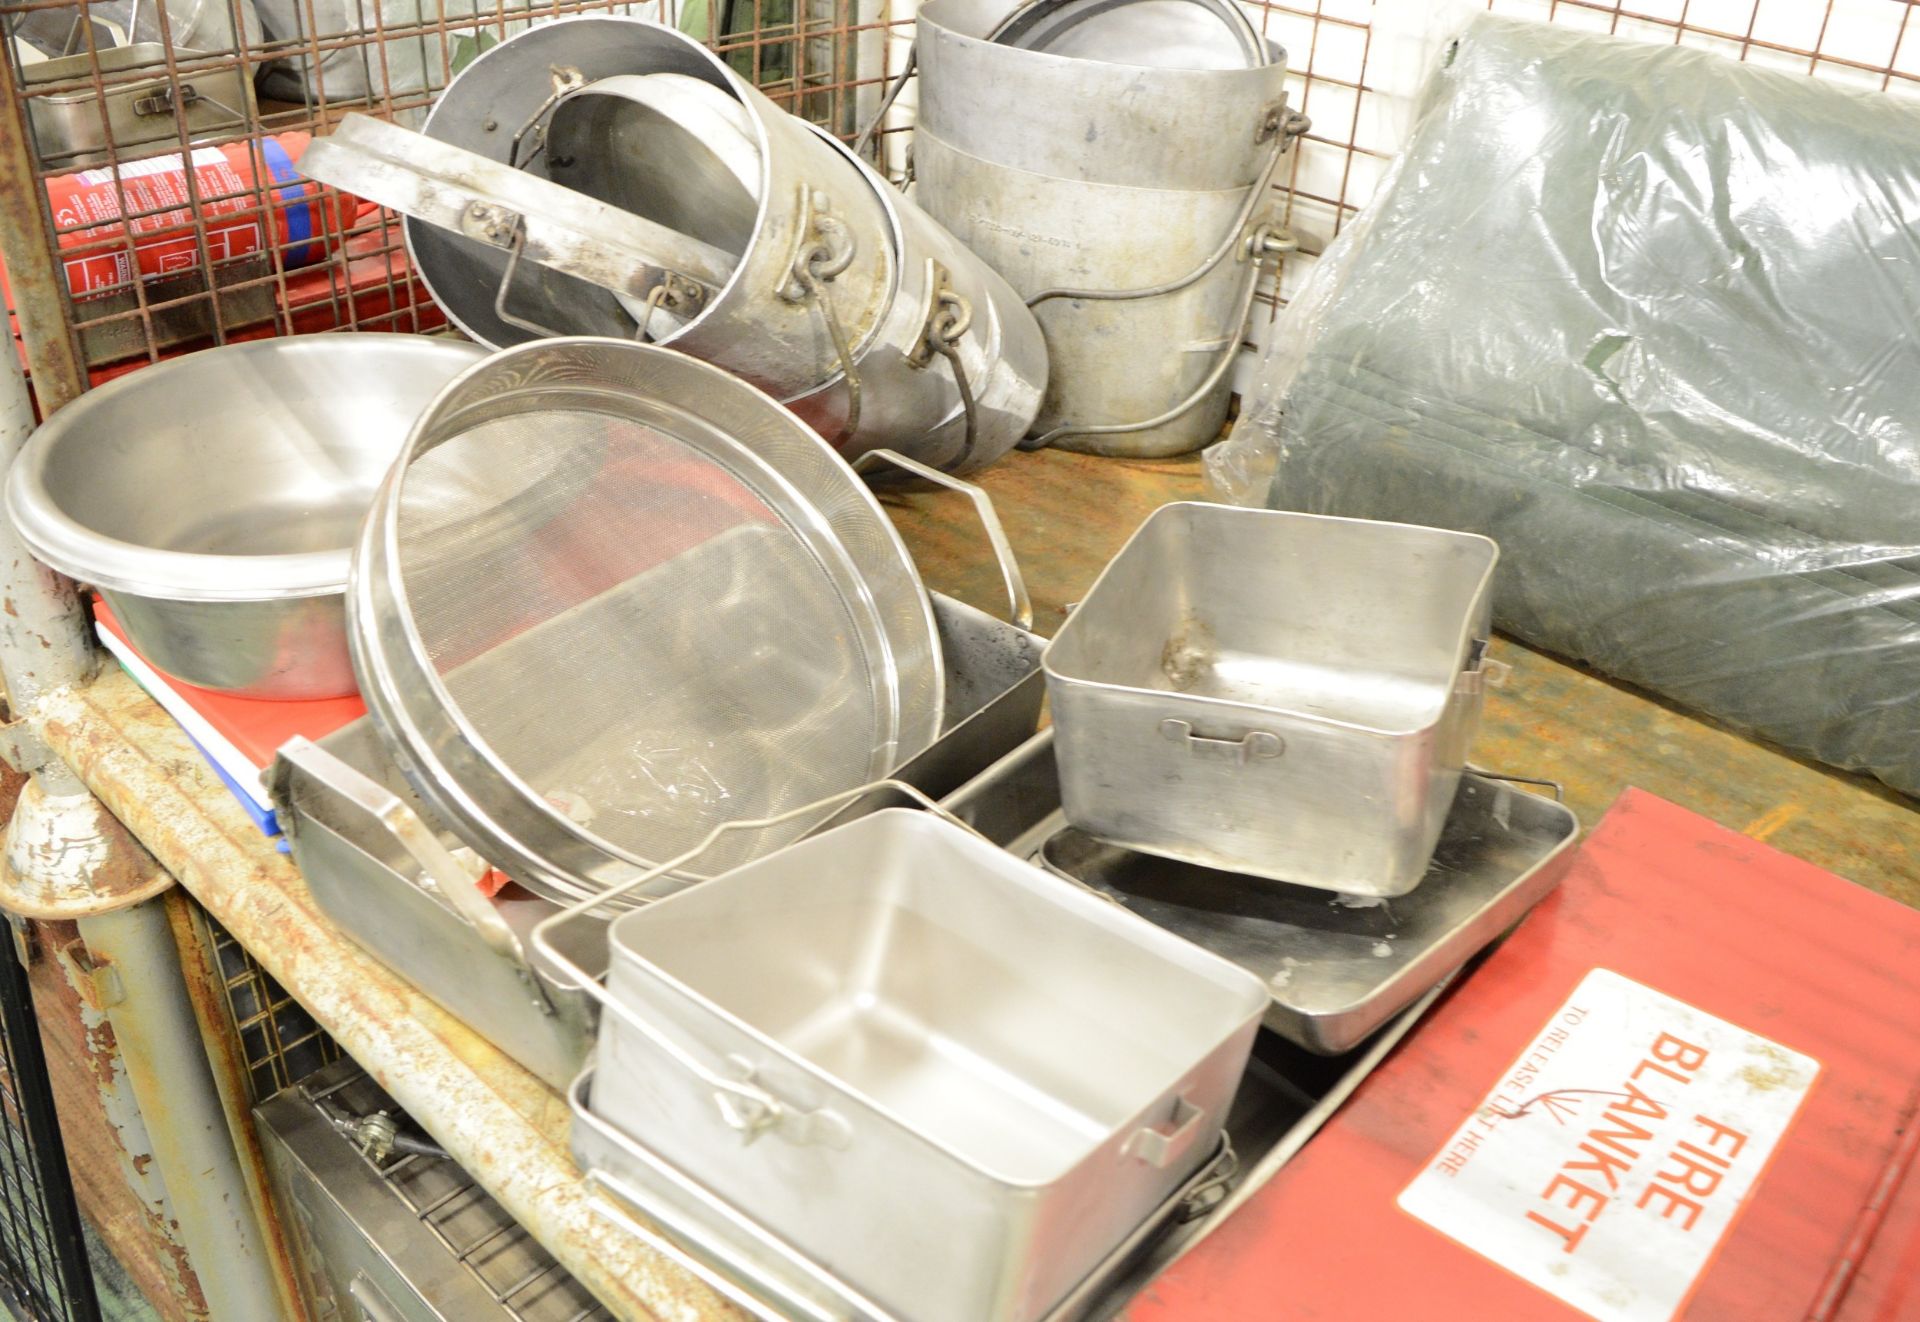 Field Kitchen set - cooker, oven, utensil set in carry box, norweigen food boxes, accessor - Image 3 of 4